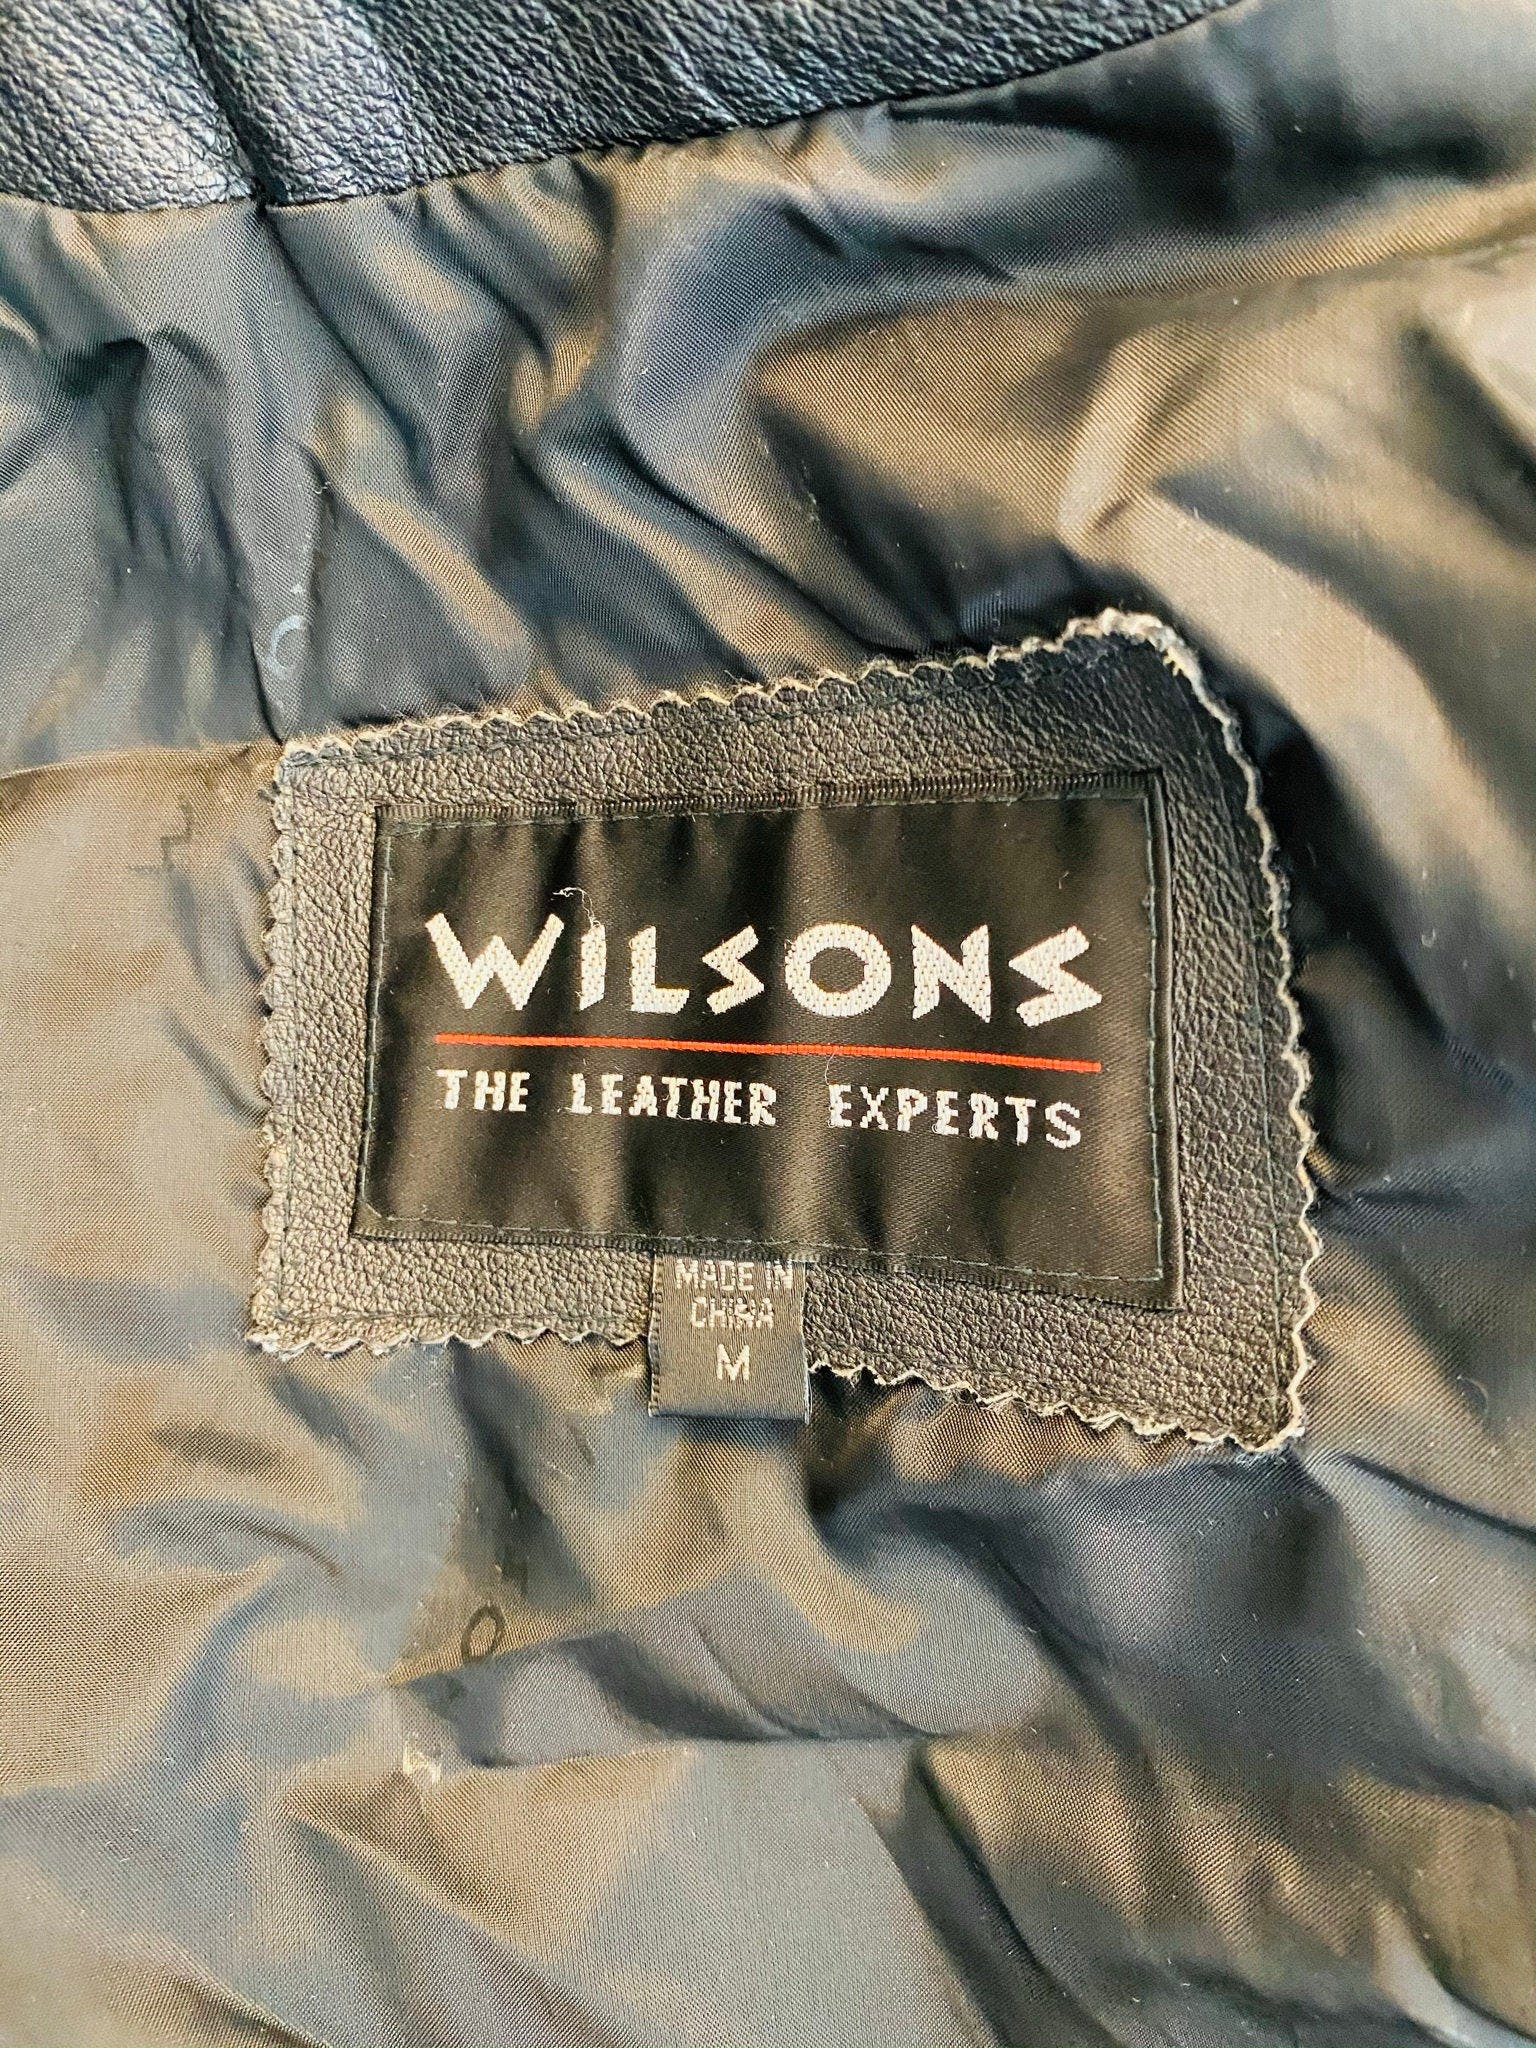 Vintage 80’s/90’s Black Leather Motorcycle Jacket by Wilsons | Shop ...